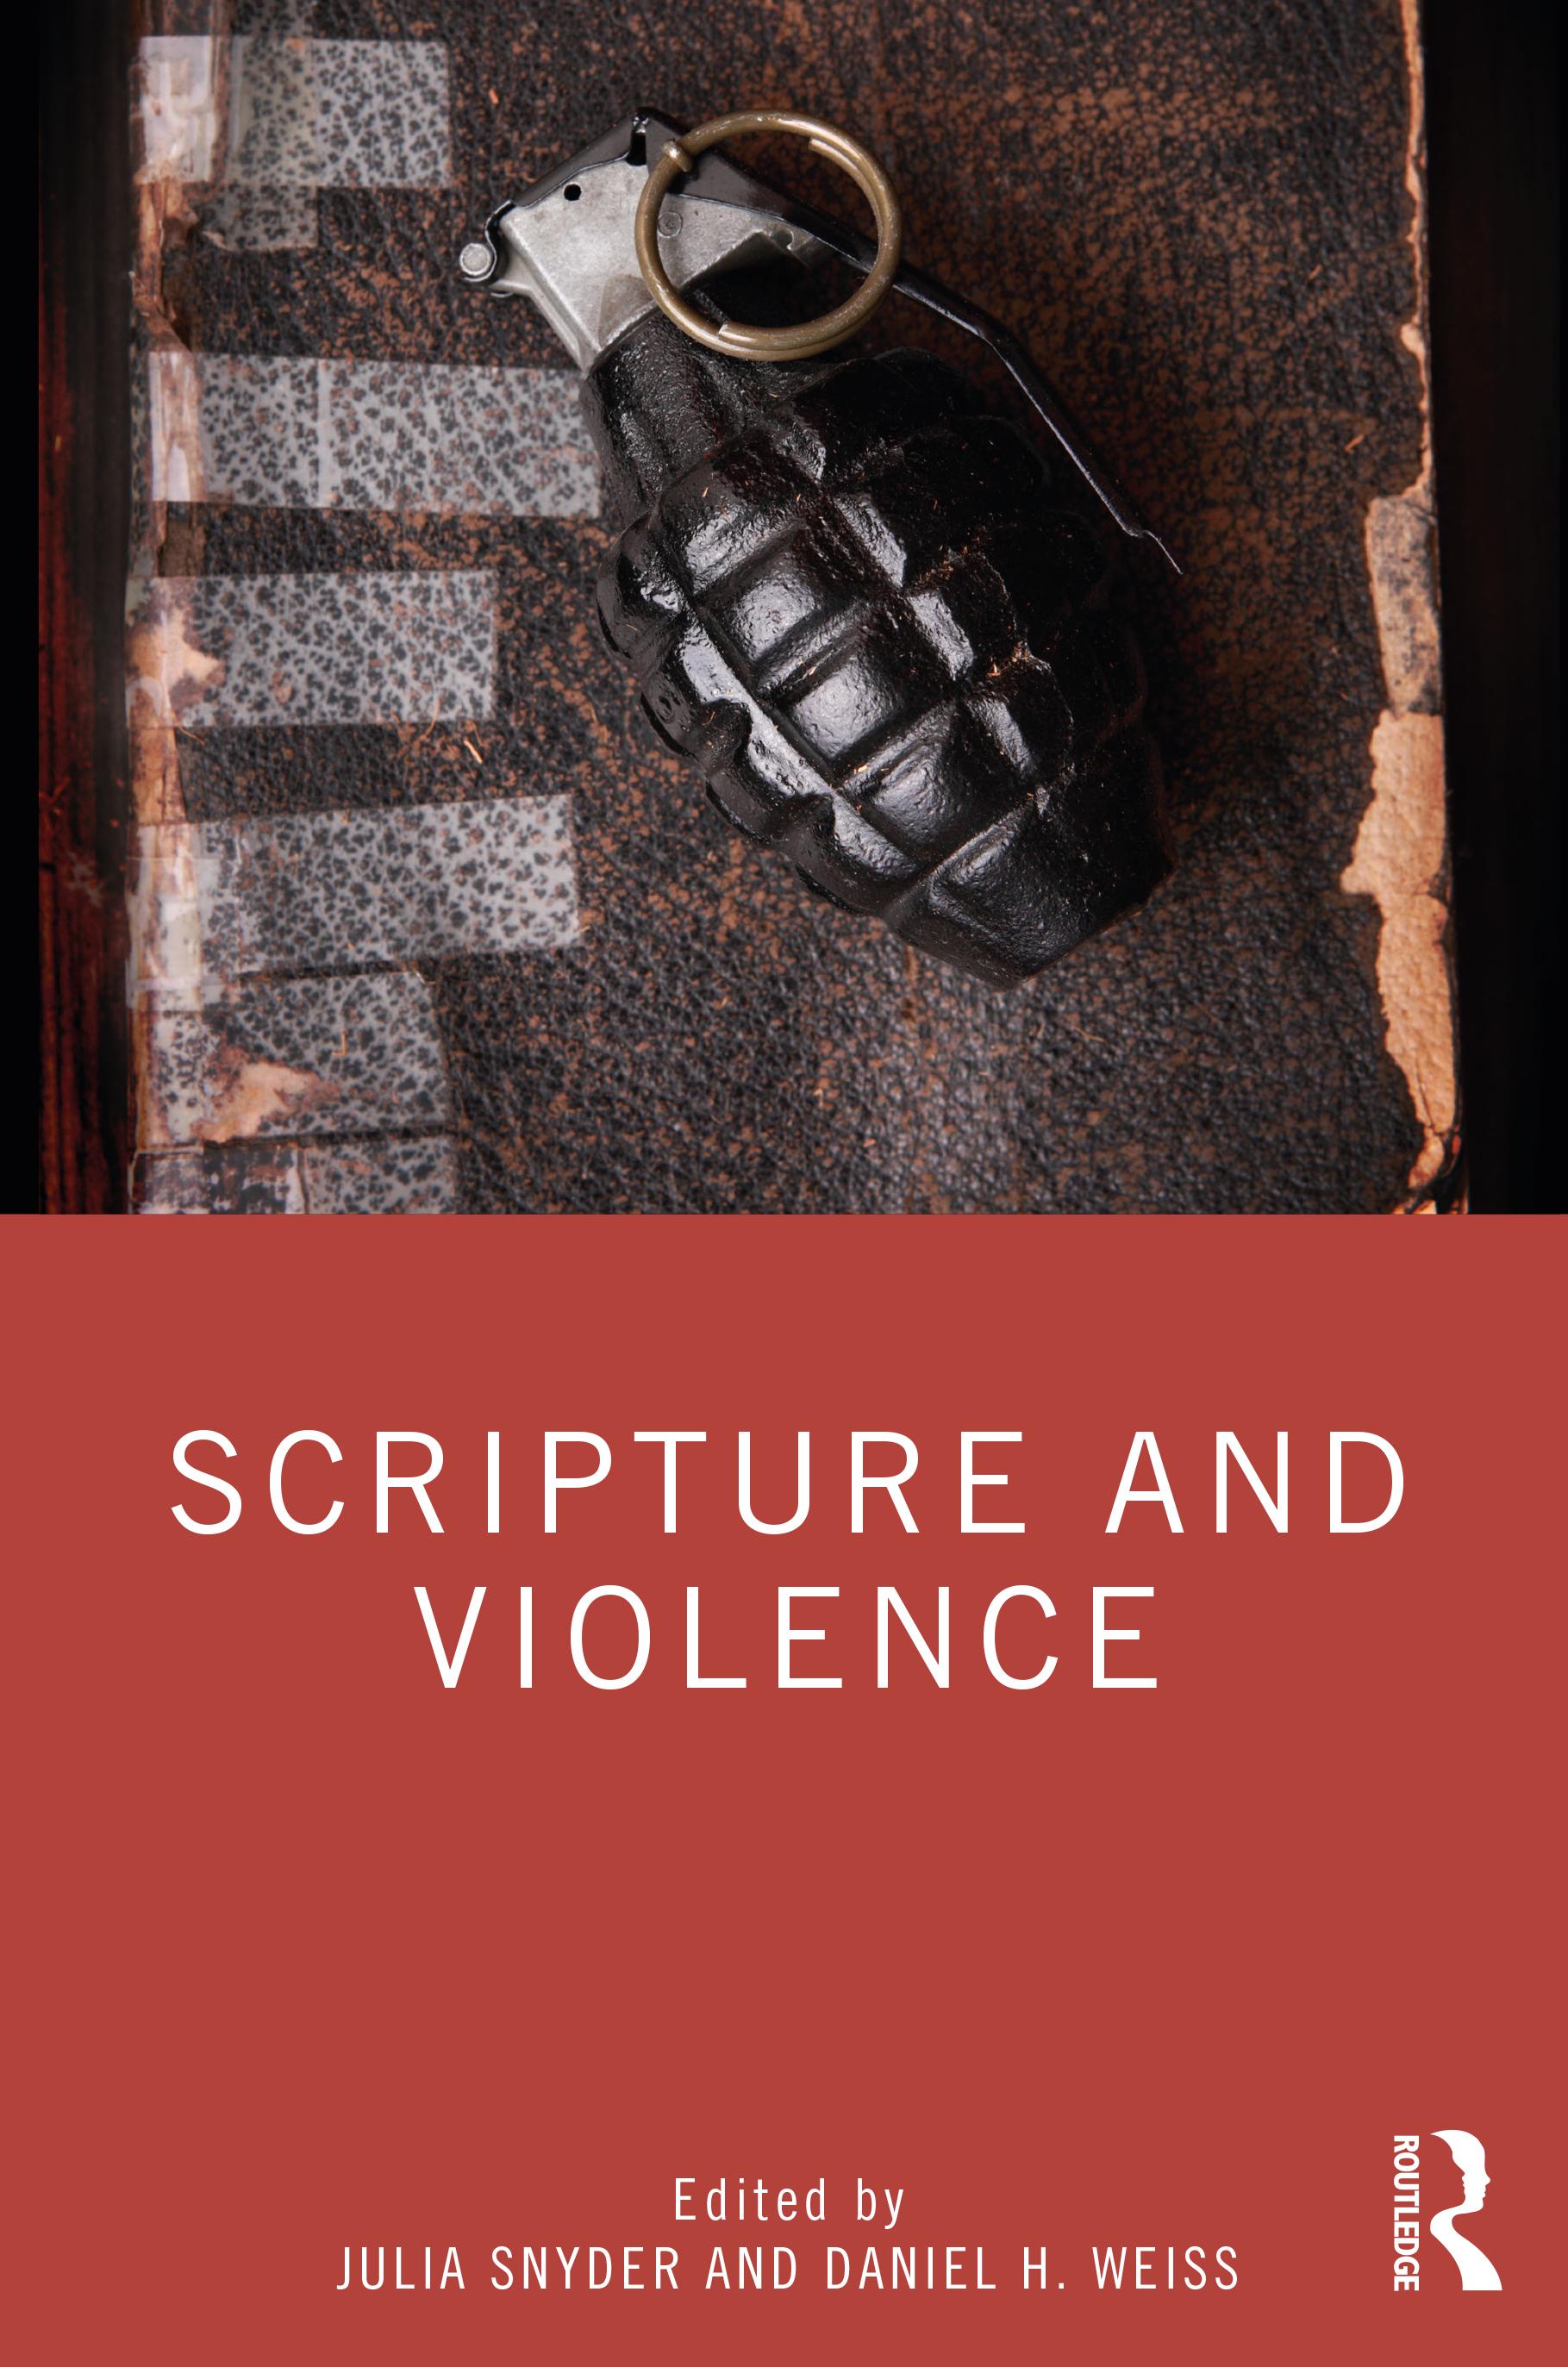 New Book on Scripture and Violence by Dr Julia Snyder and Dr Daniel Weiss